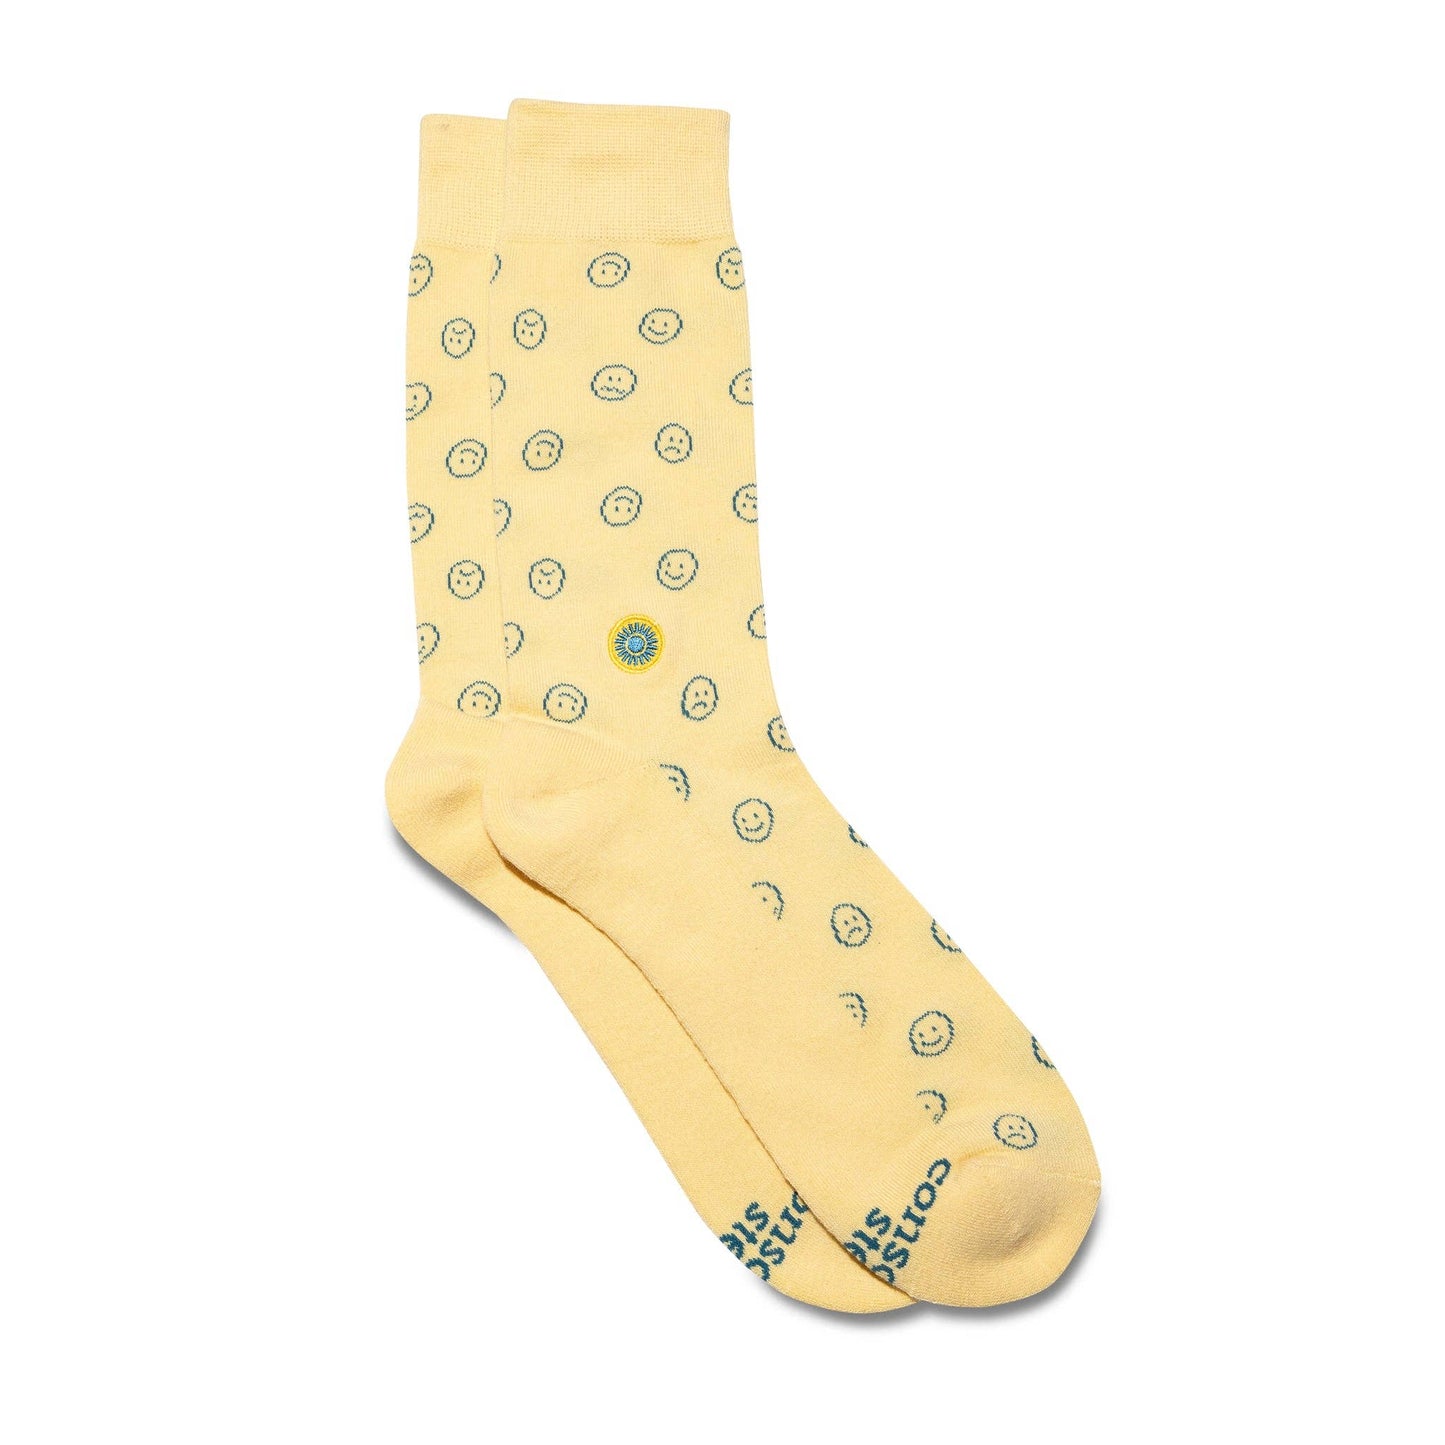 Socks that Support Mental Health (Smiley Faces)